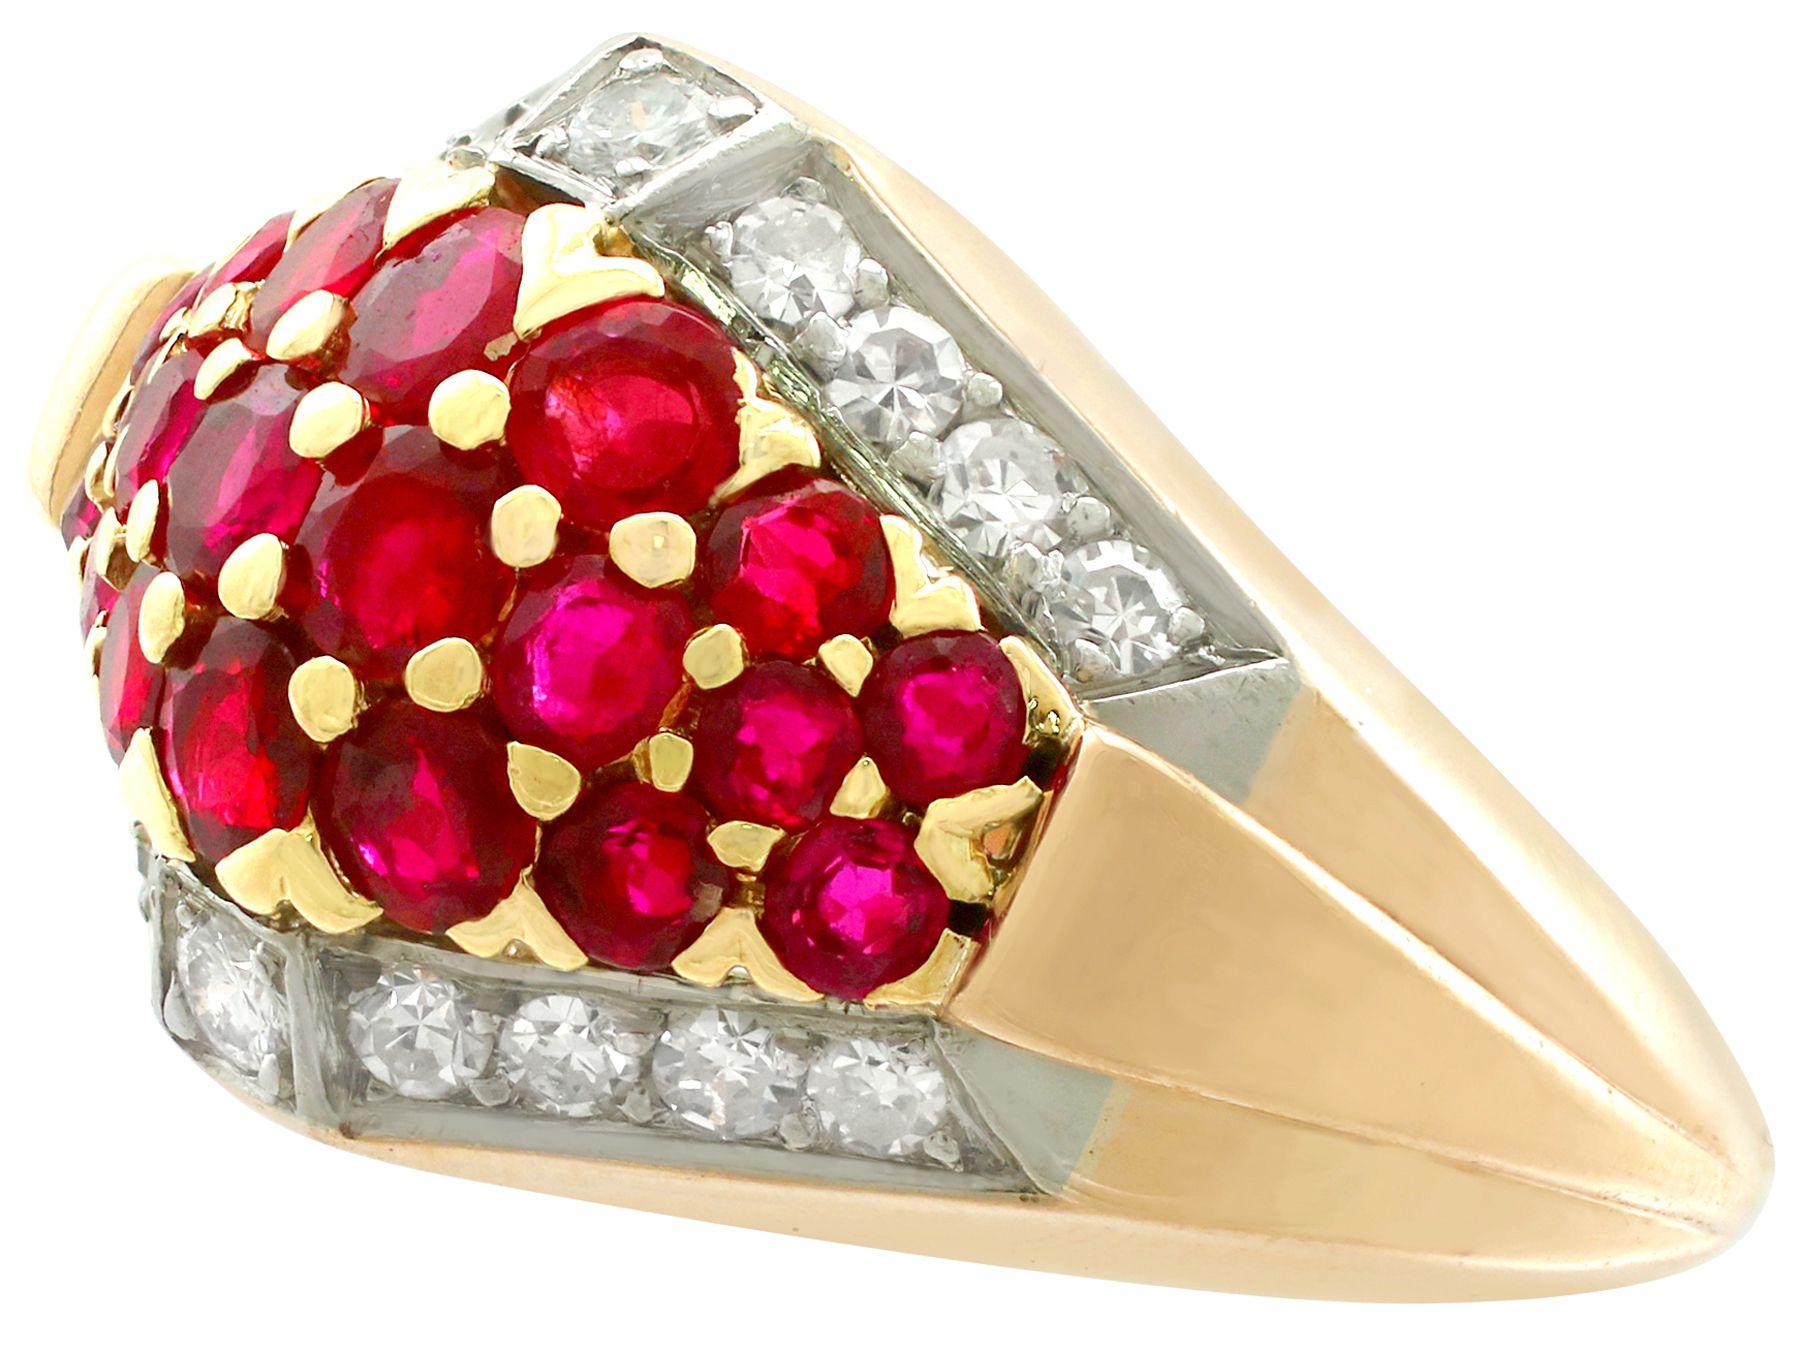 Vintage Art Deco Style 1950s Ruby Diamond Yellow Gold Cocktail Ring In Excellent Condition For Sale In Jesmond, Newcastle Upon Tyne